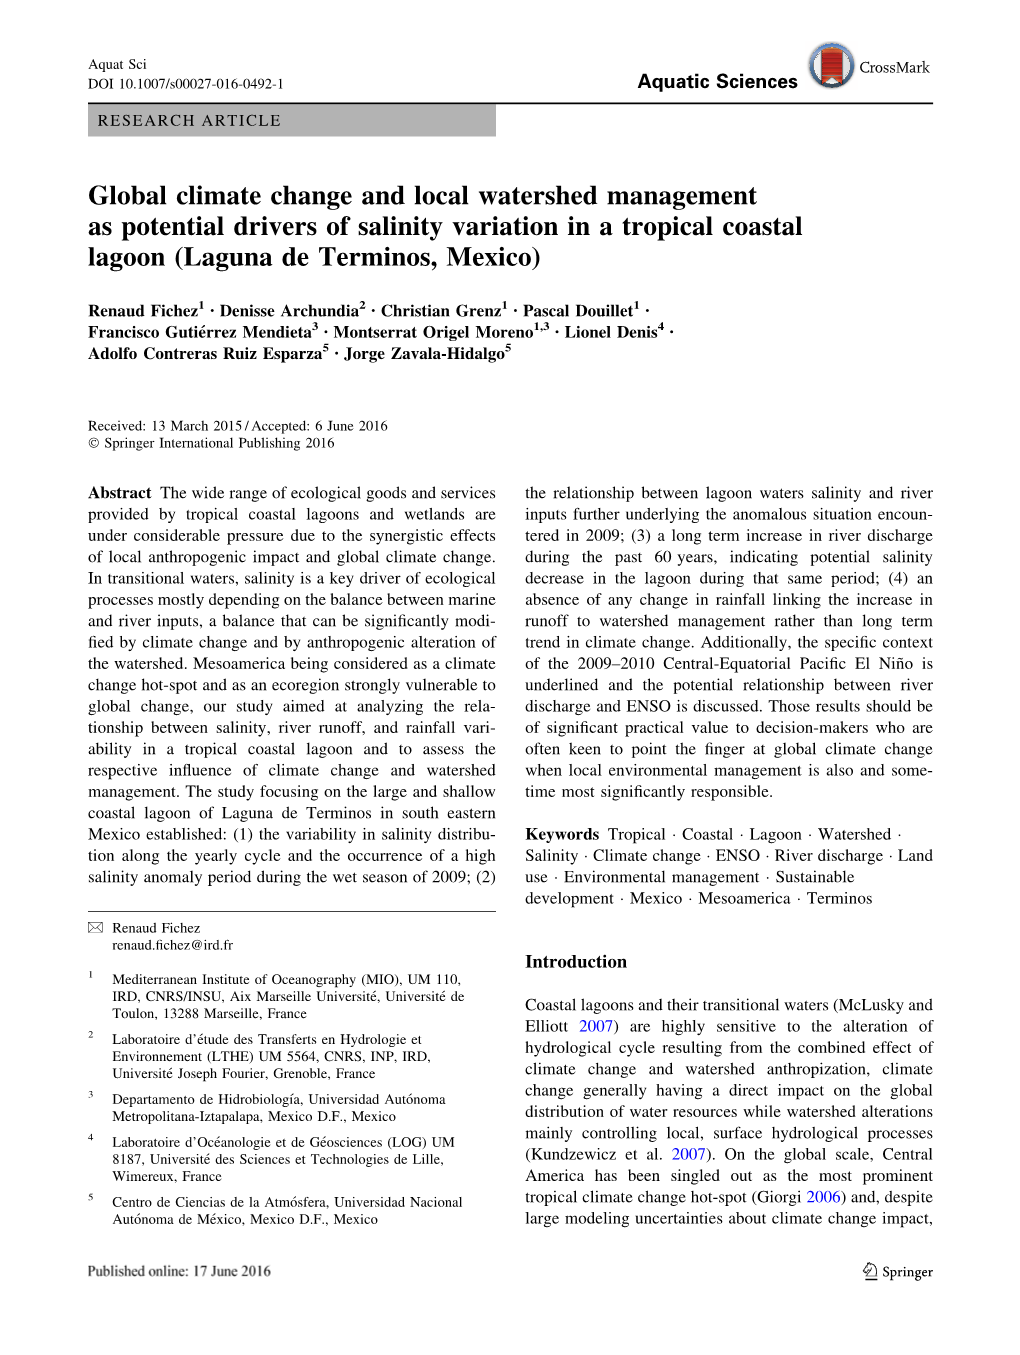 Global Climate Change and Local Watershed Management As Potential Drivers of Salinity Variation in a Tropical Coastal Lagoon (Laguna De Terminos, Mexico)